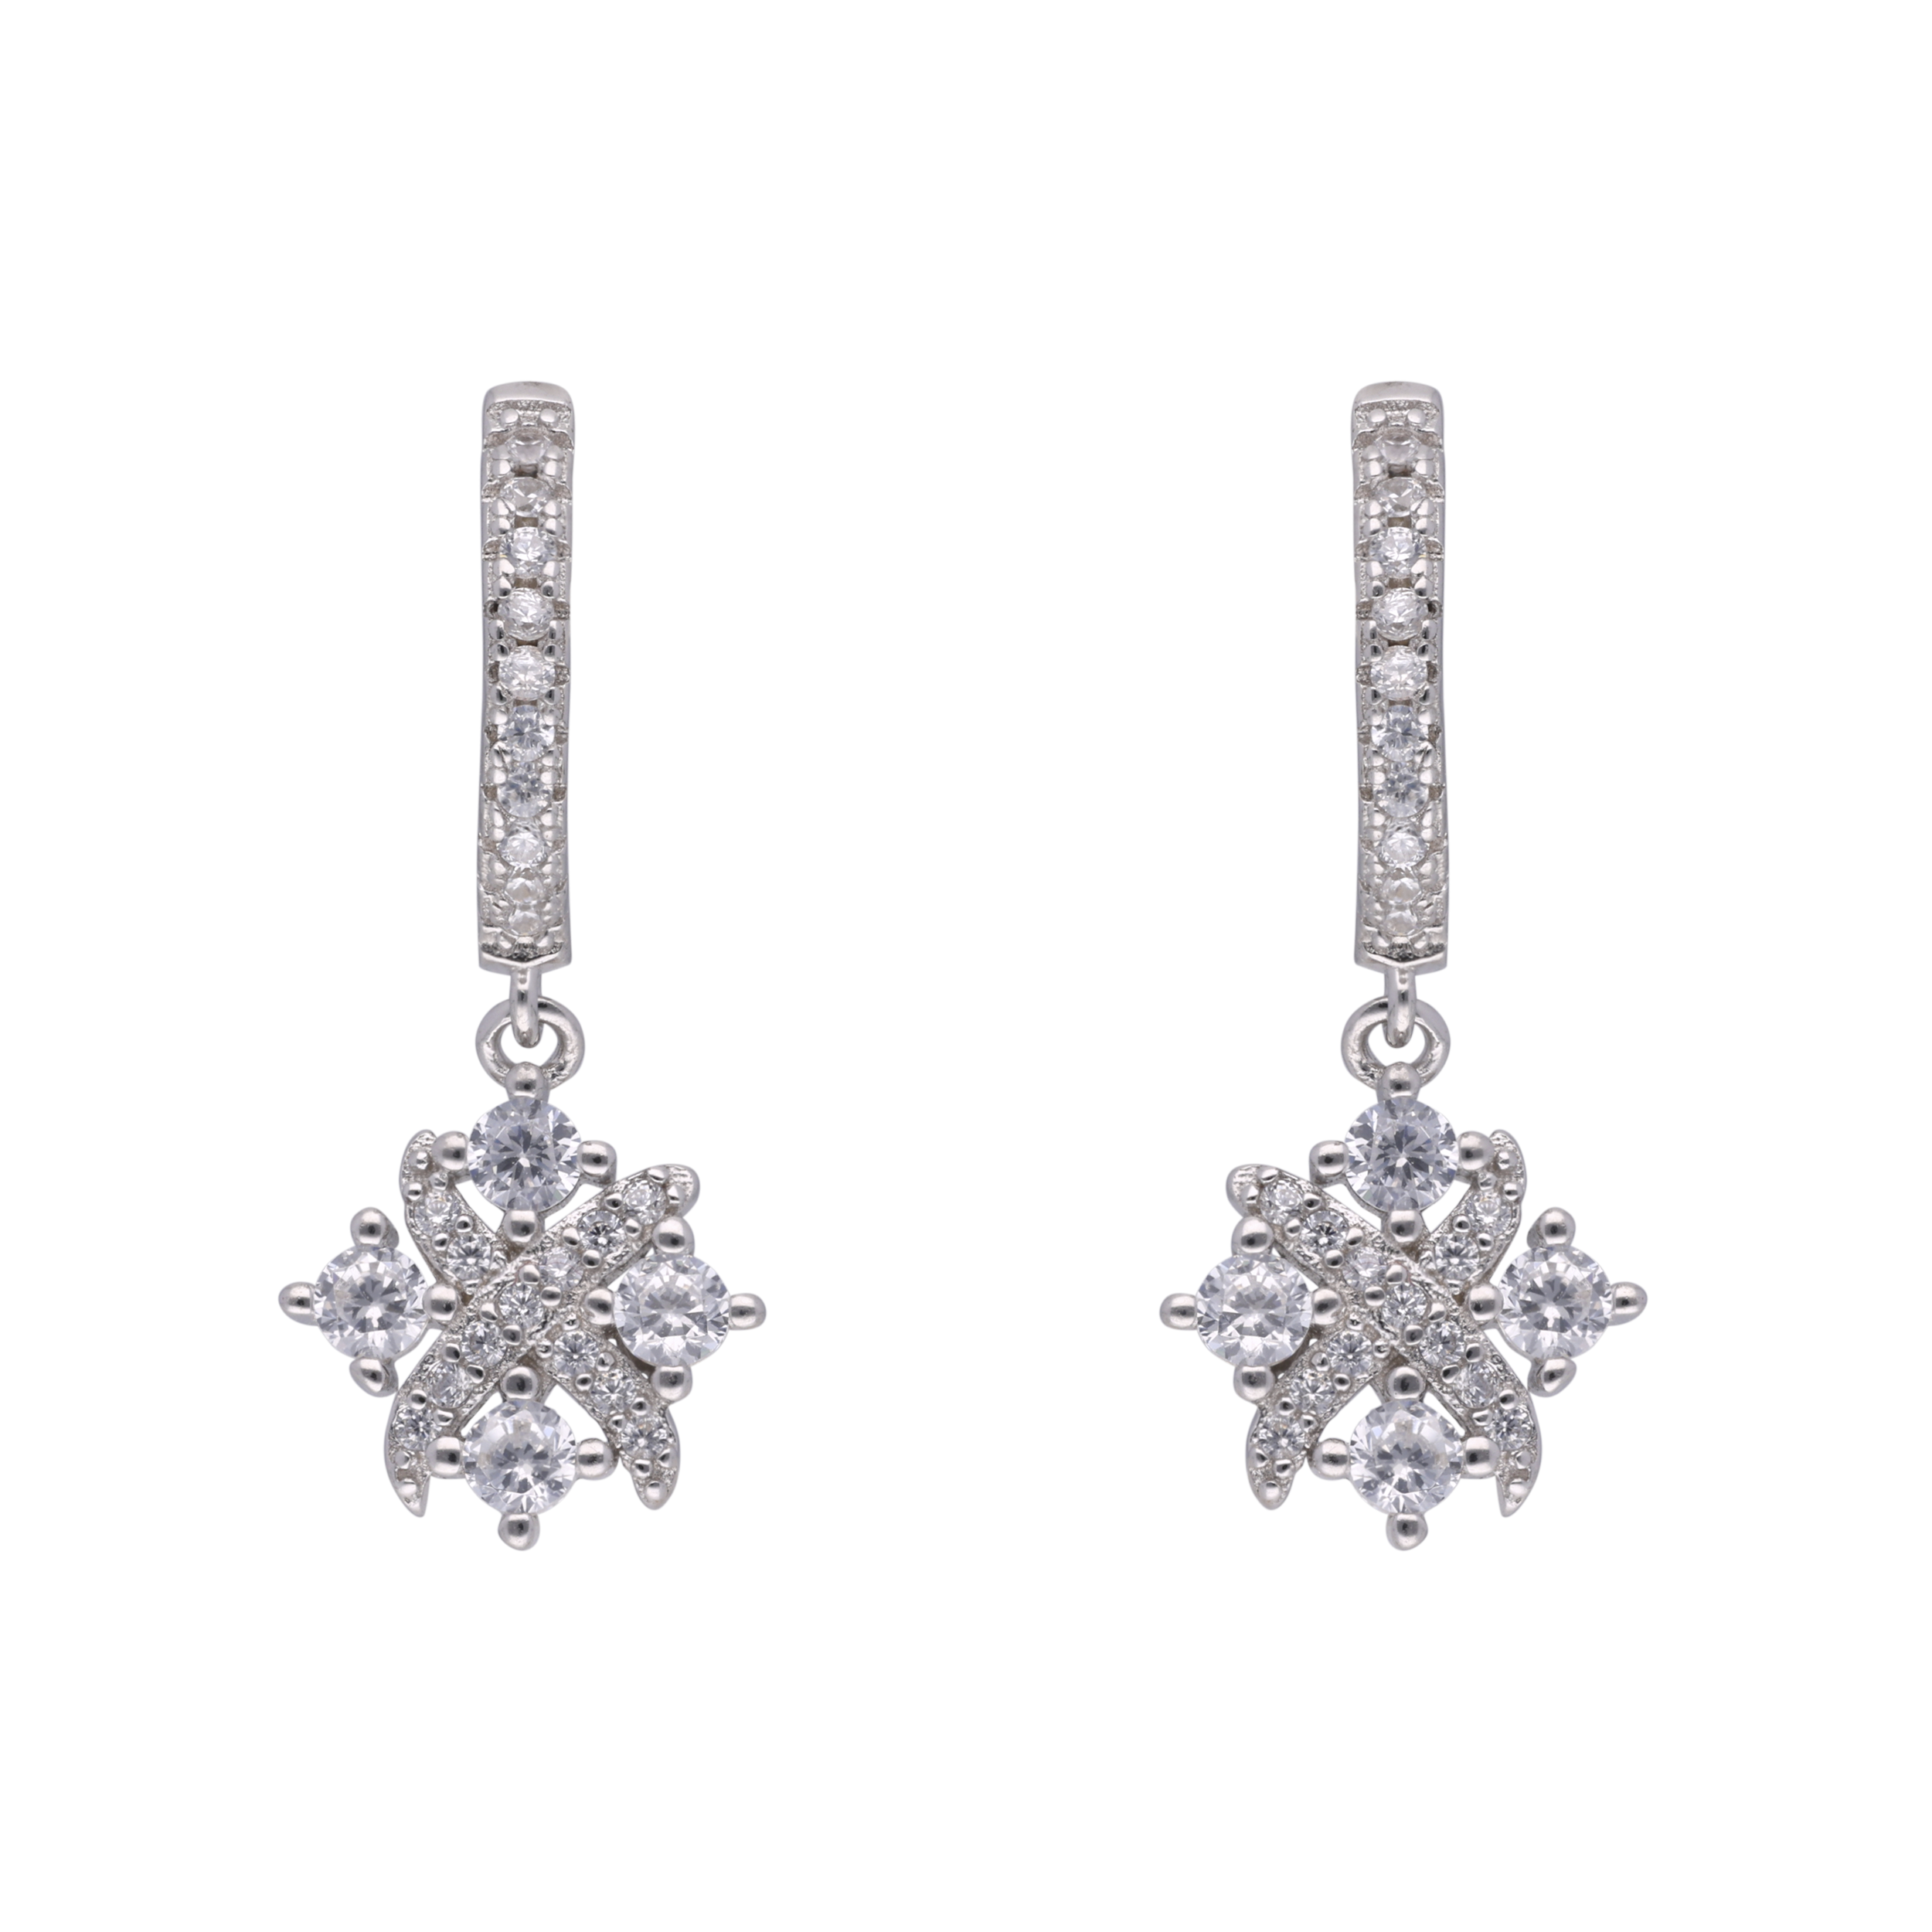 Blossom Sparkle: Floral Design Sterling Silver Eardrops with Cubic Zirconia | SKU : 0003109250, 0003109267, 0003109274, 0003109281, 0003109304